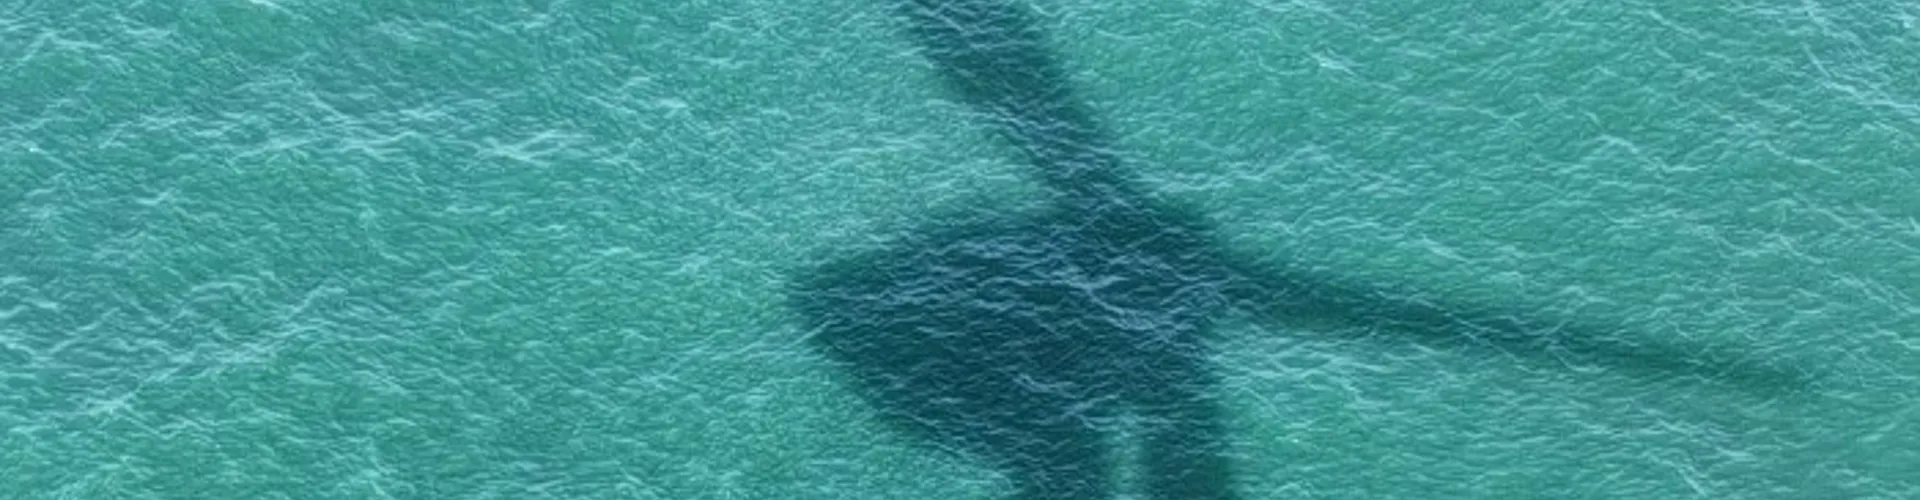 shadow of a wind turbine in the water